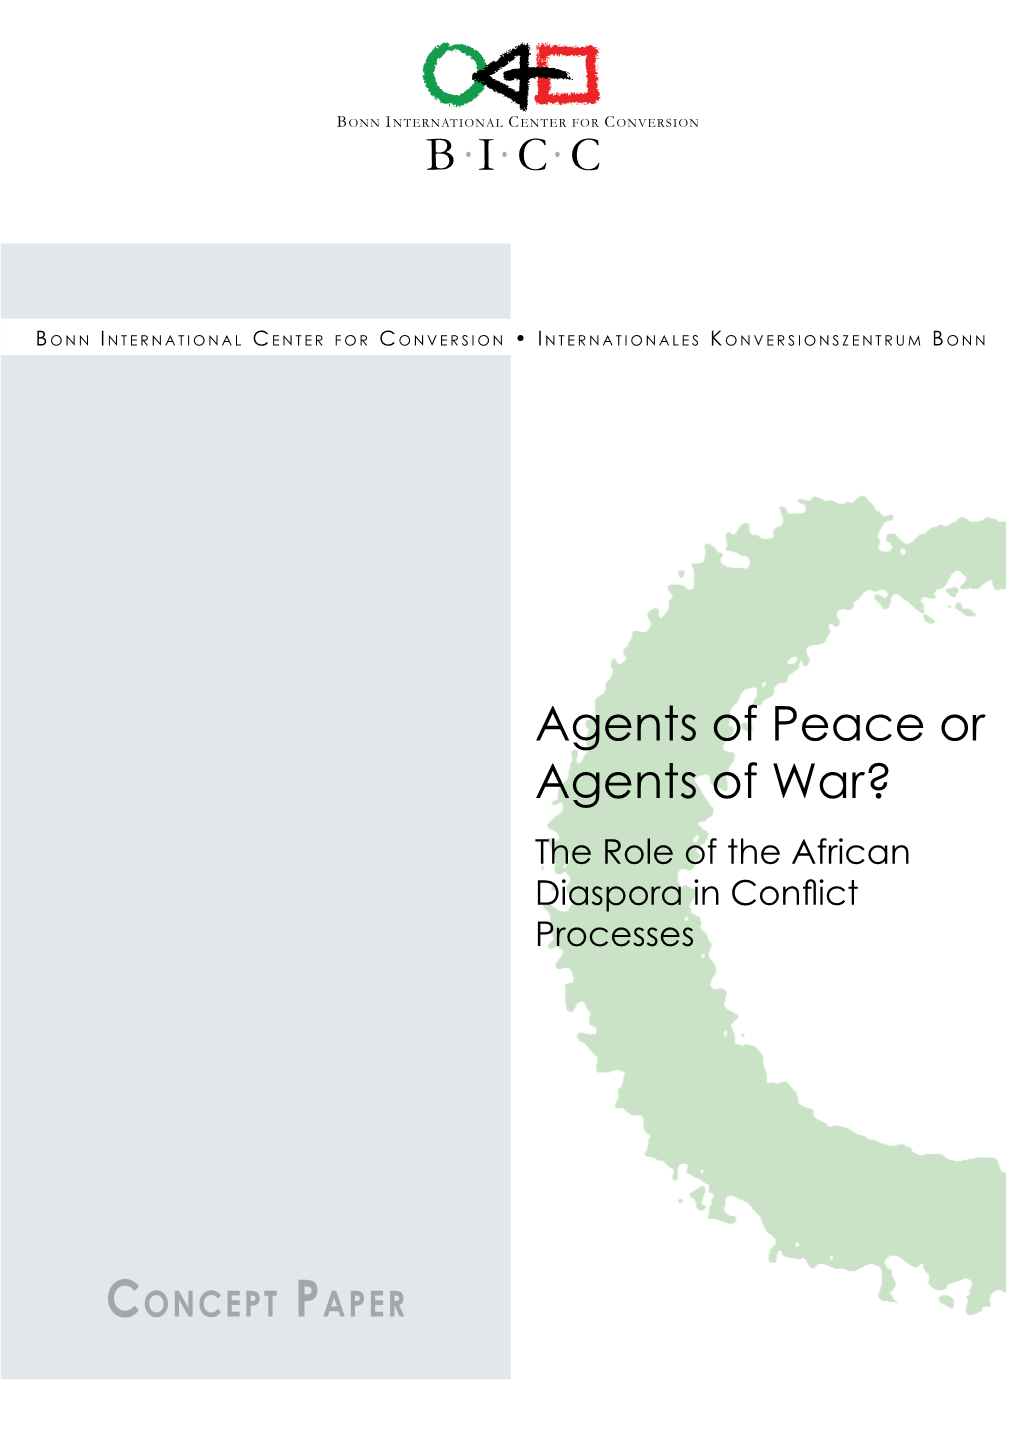 The Role of the African Diaspora in Conflict Processes